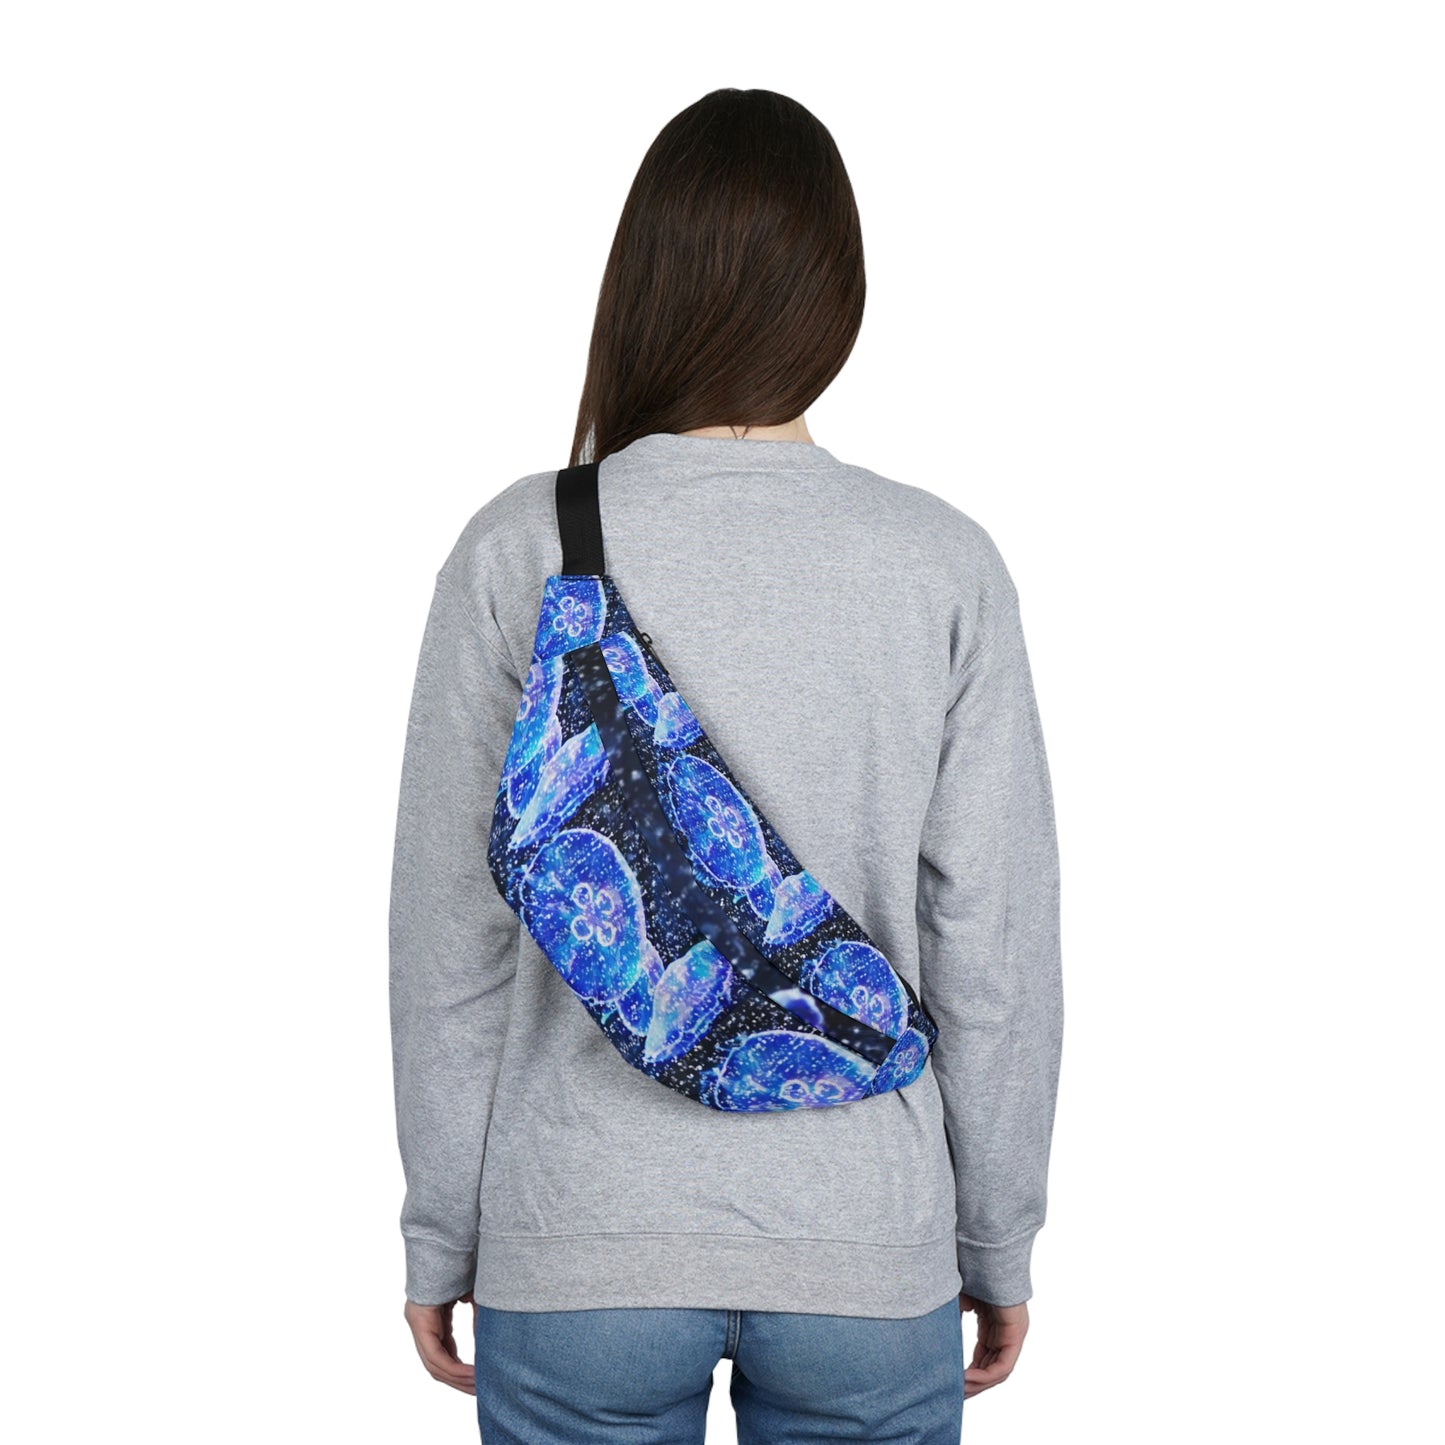 Jelly fish Large Fanny Pack